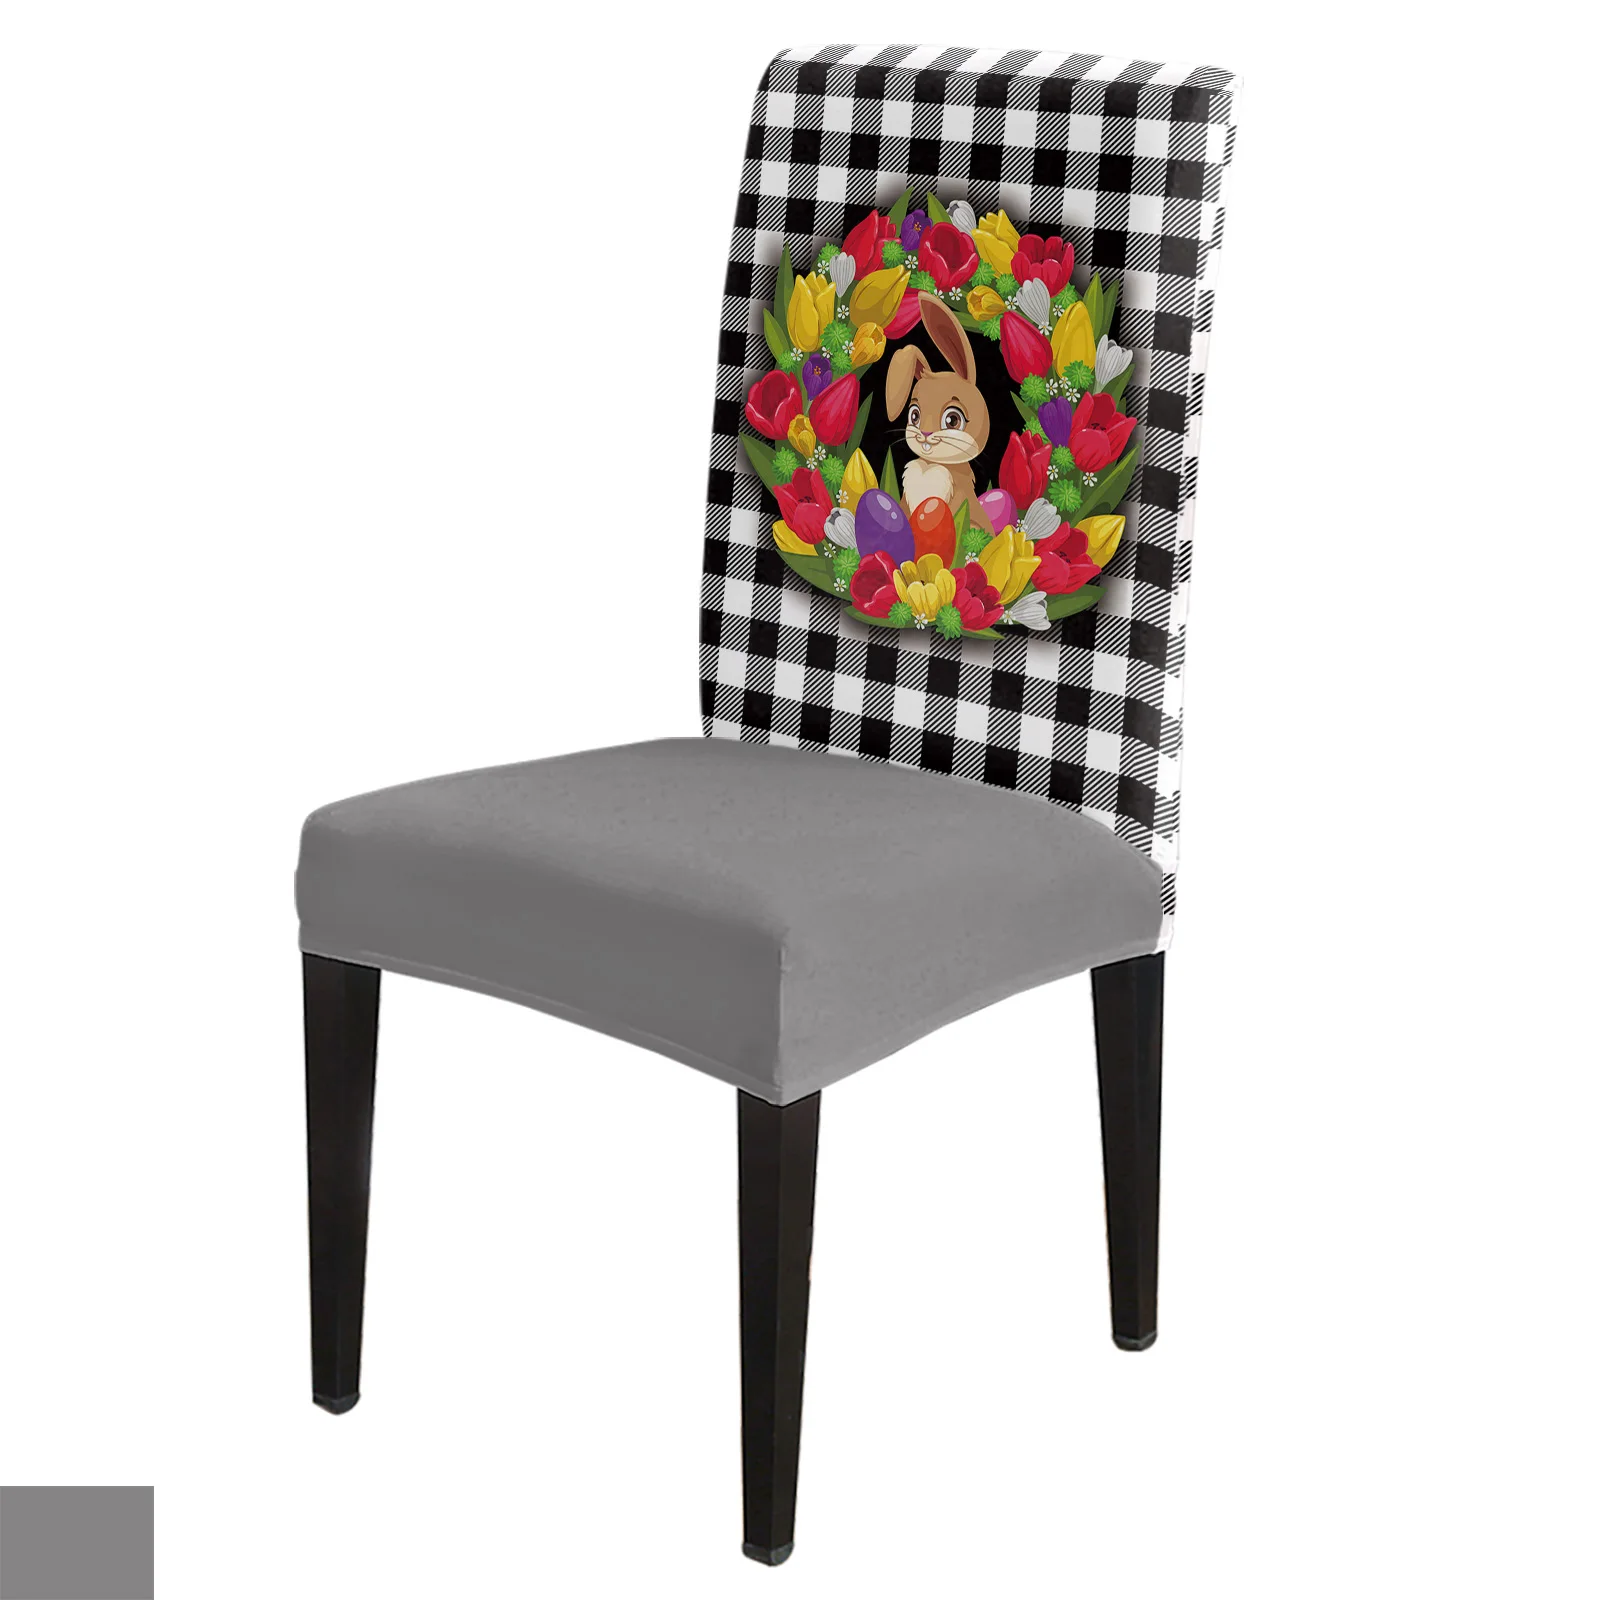 

Easter Checkered Flower Rabbit Wood Grain Chair Cover Dining Spandex Stretch Seat Covers Home Office Decor Desk Chair Case Set